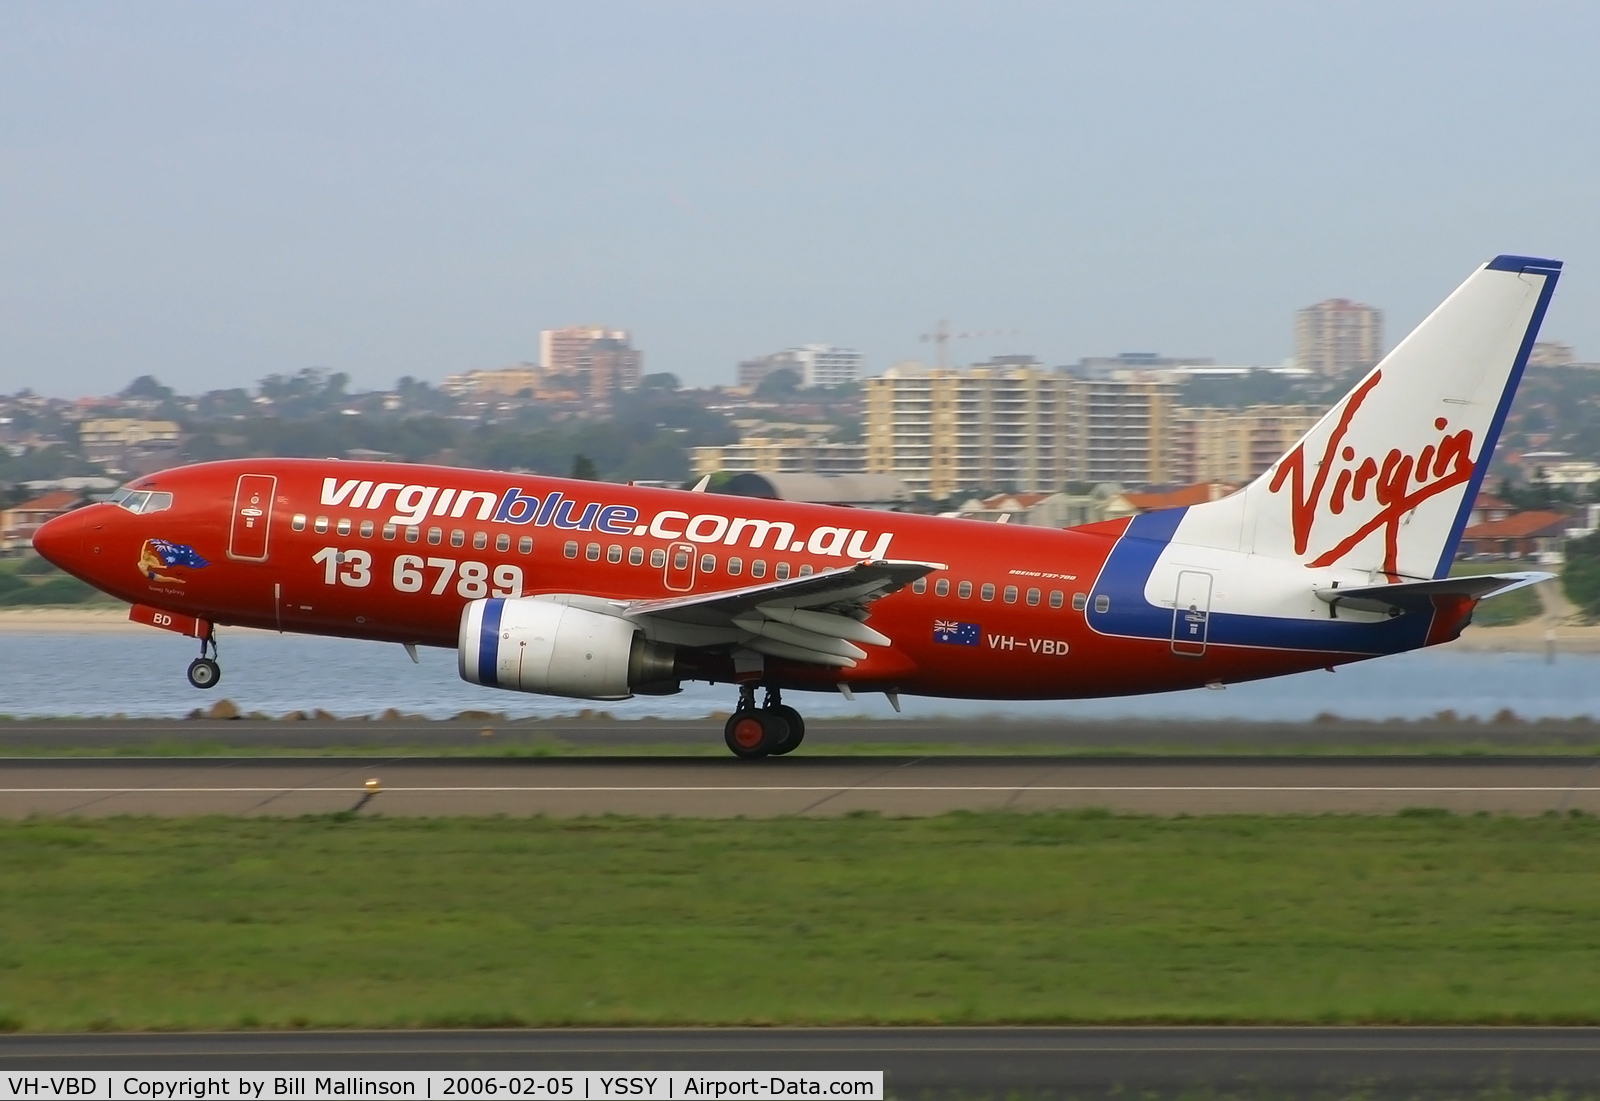 VH-VBD, 2001 Boeing 737-7Q8 C/N 30707, rotating from 16R